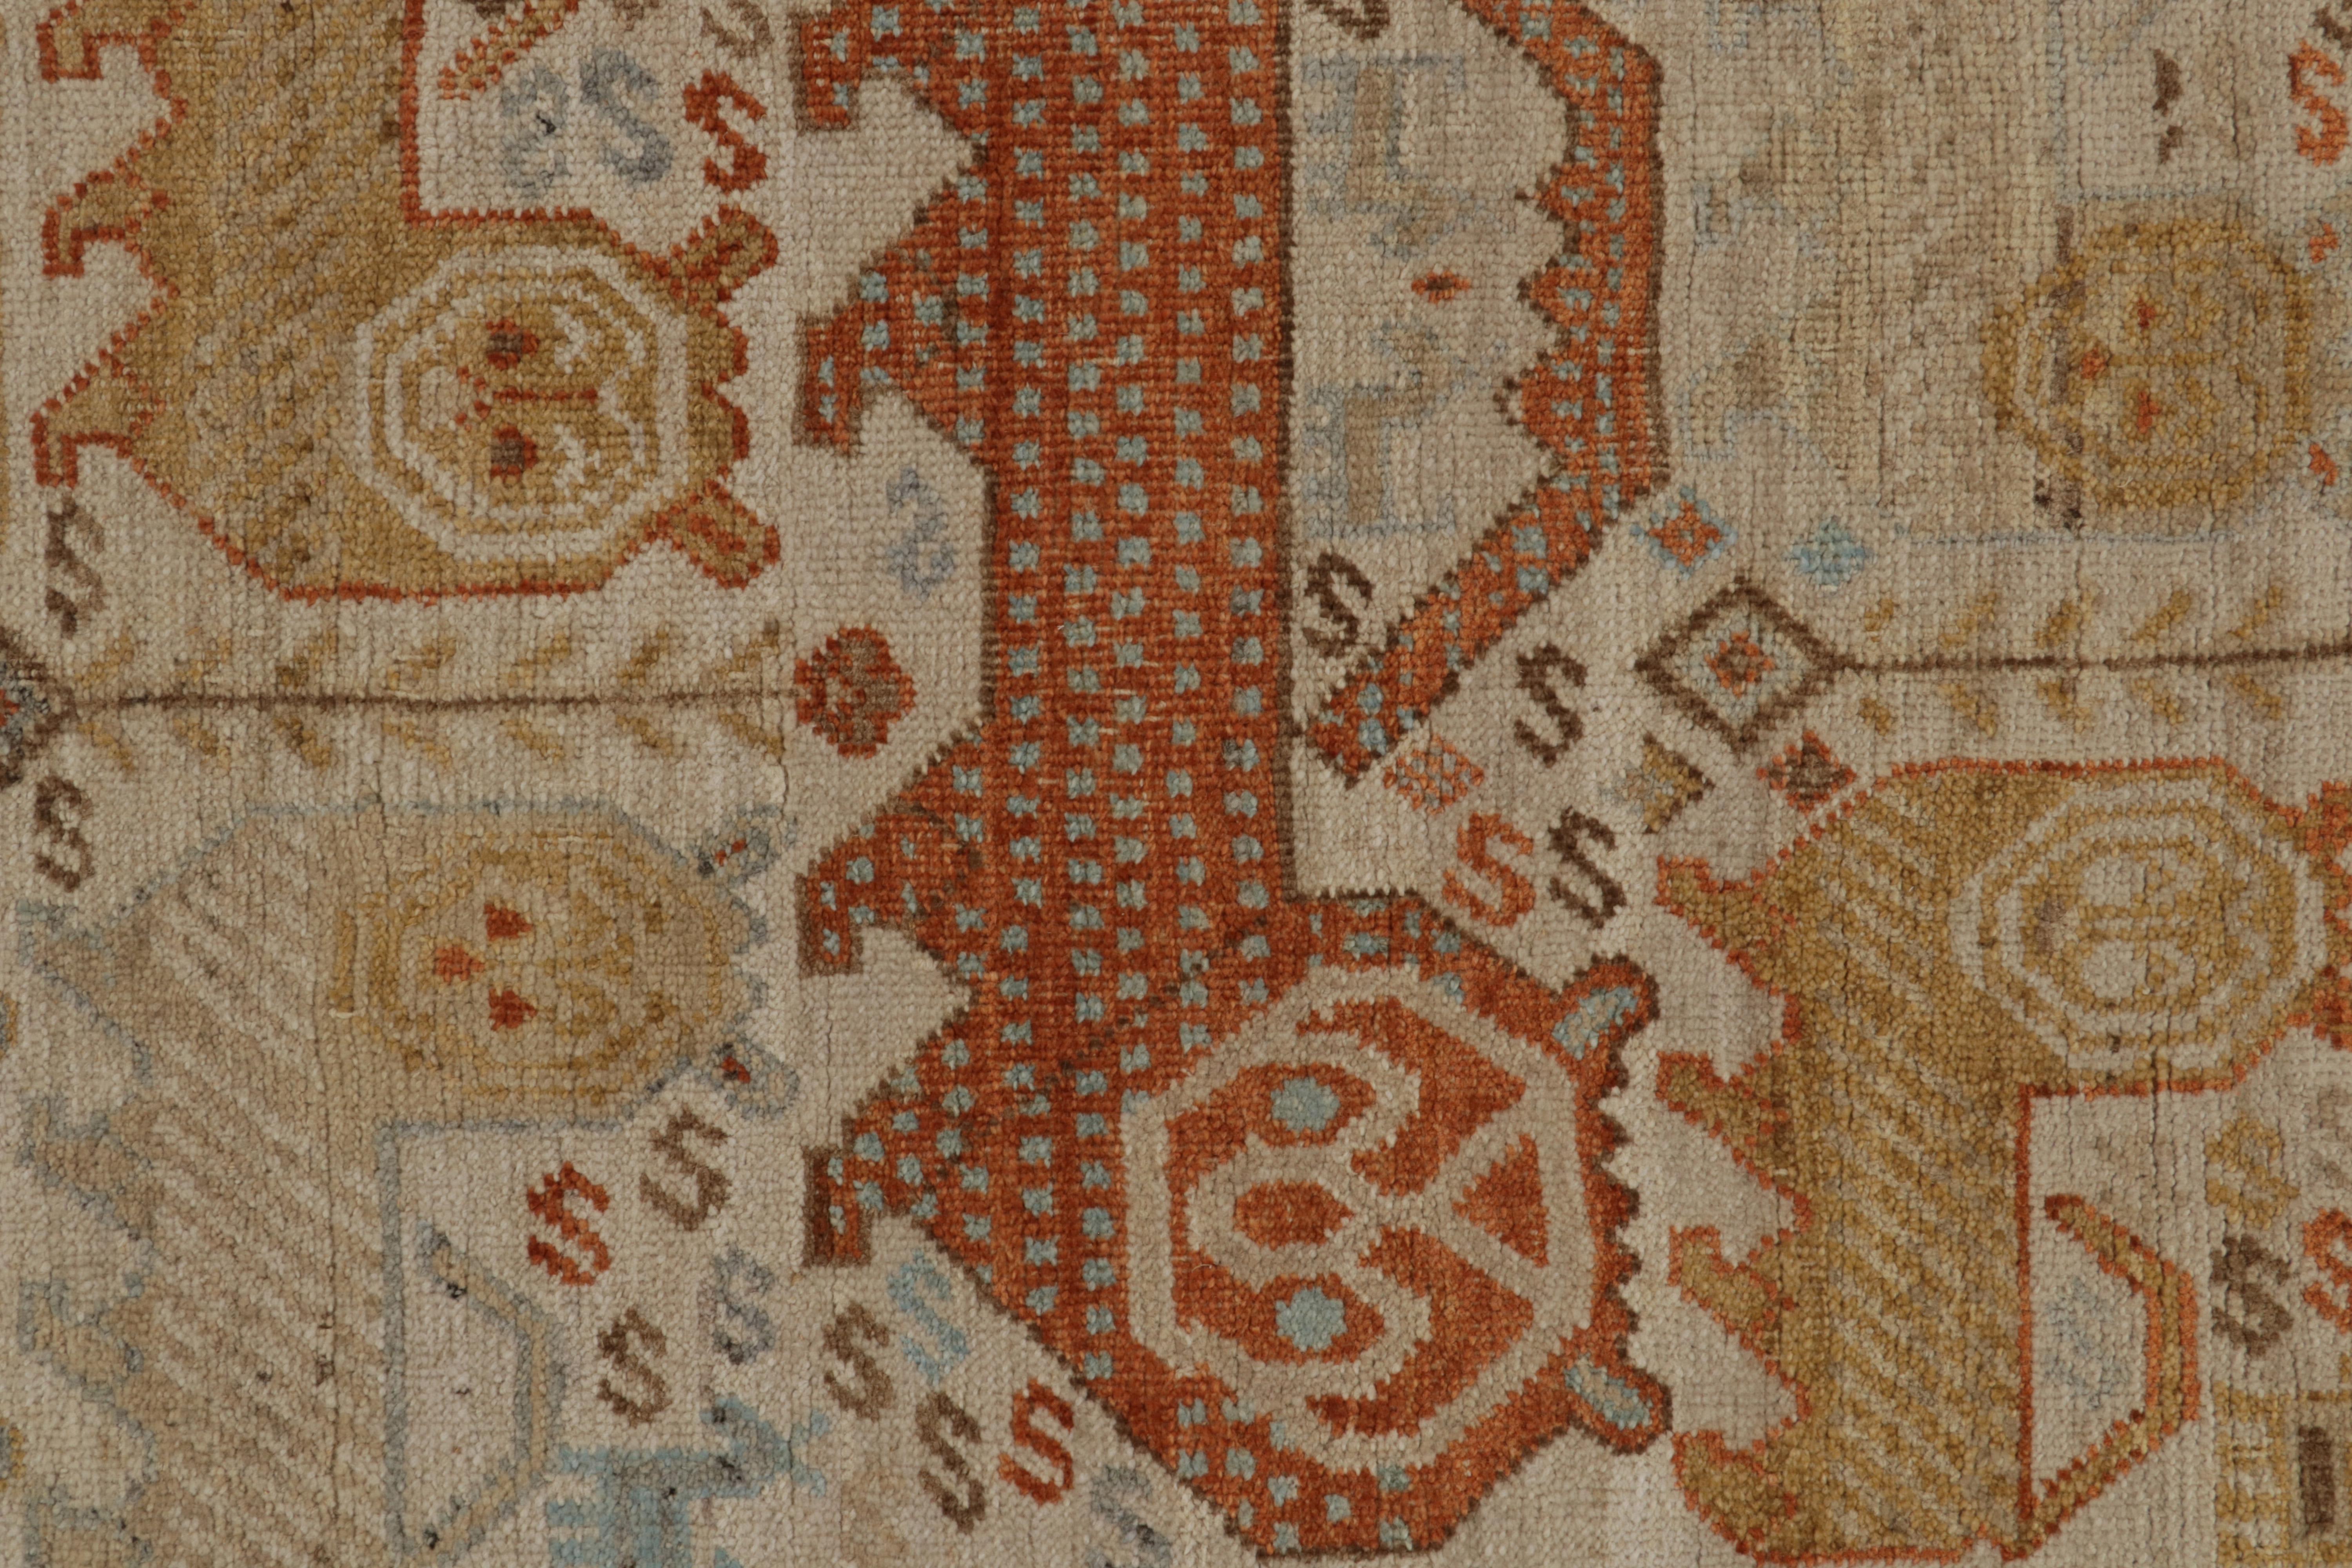 Contemporary Rug & Kilim’s Tribal Style Runner in Beige-Brown, Blue and Red Pictorials For Sale